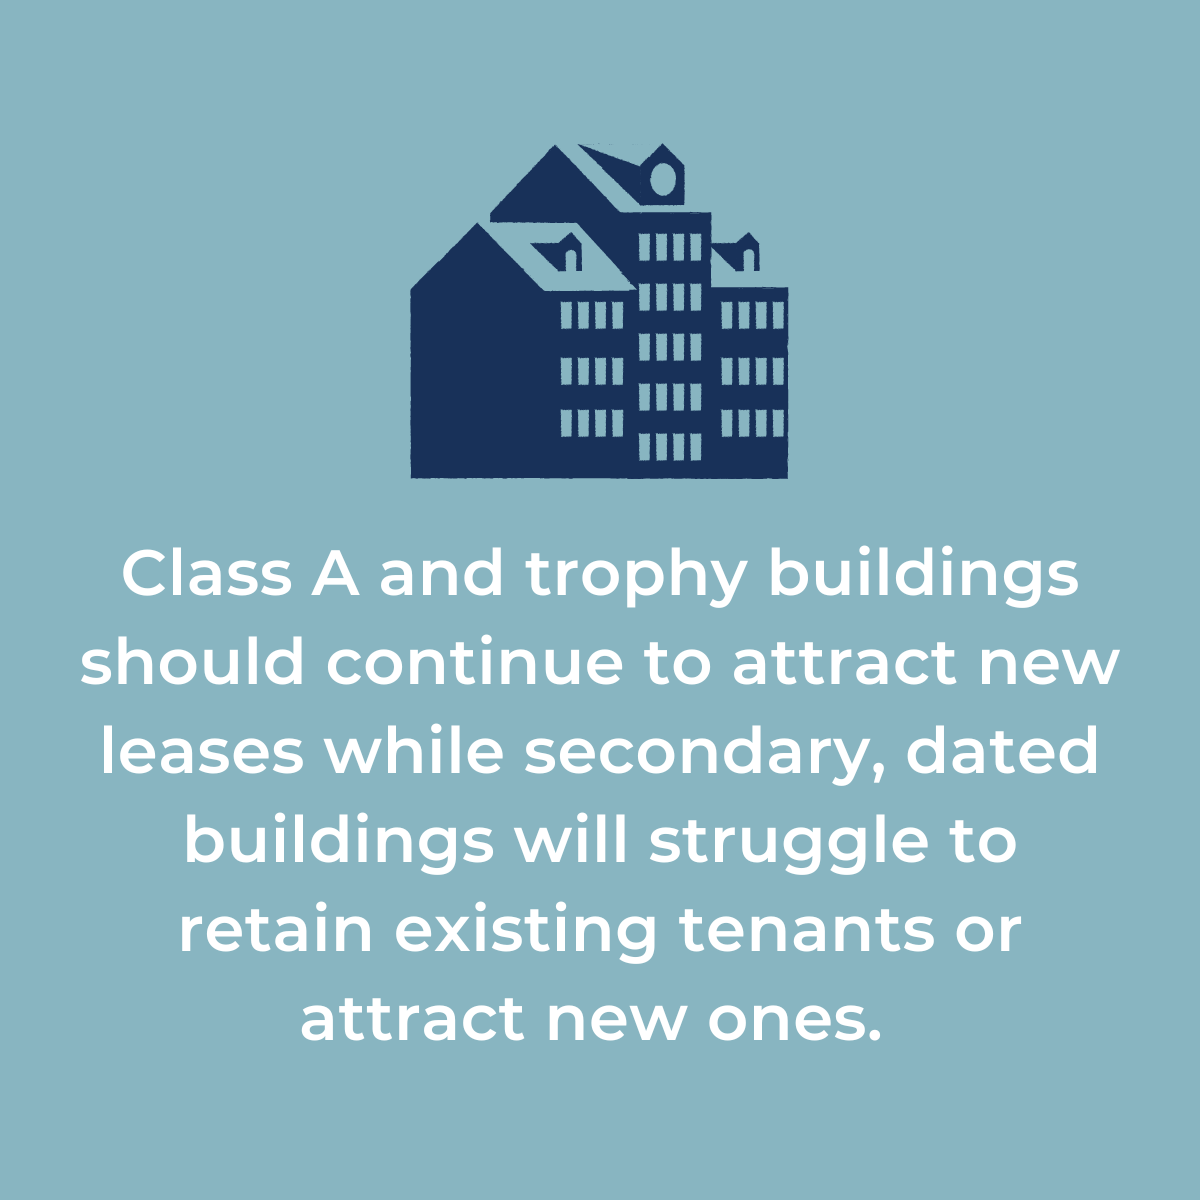 Class A and trophy buildings should continue to attract new leases while secondary, dated buildings will struggle to retain existing tenants or attract new ones. 